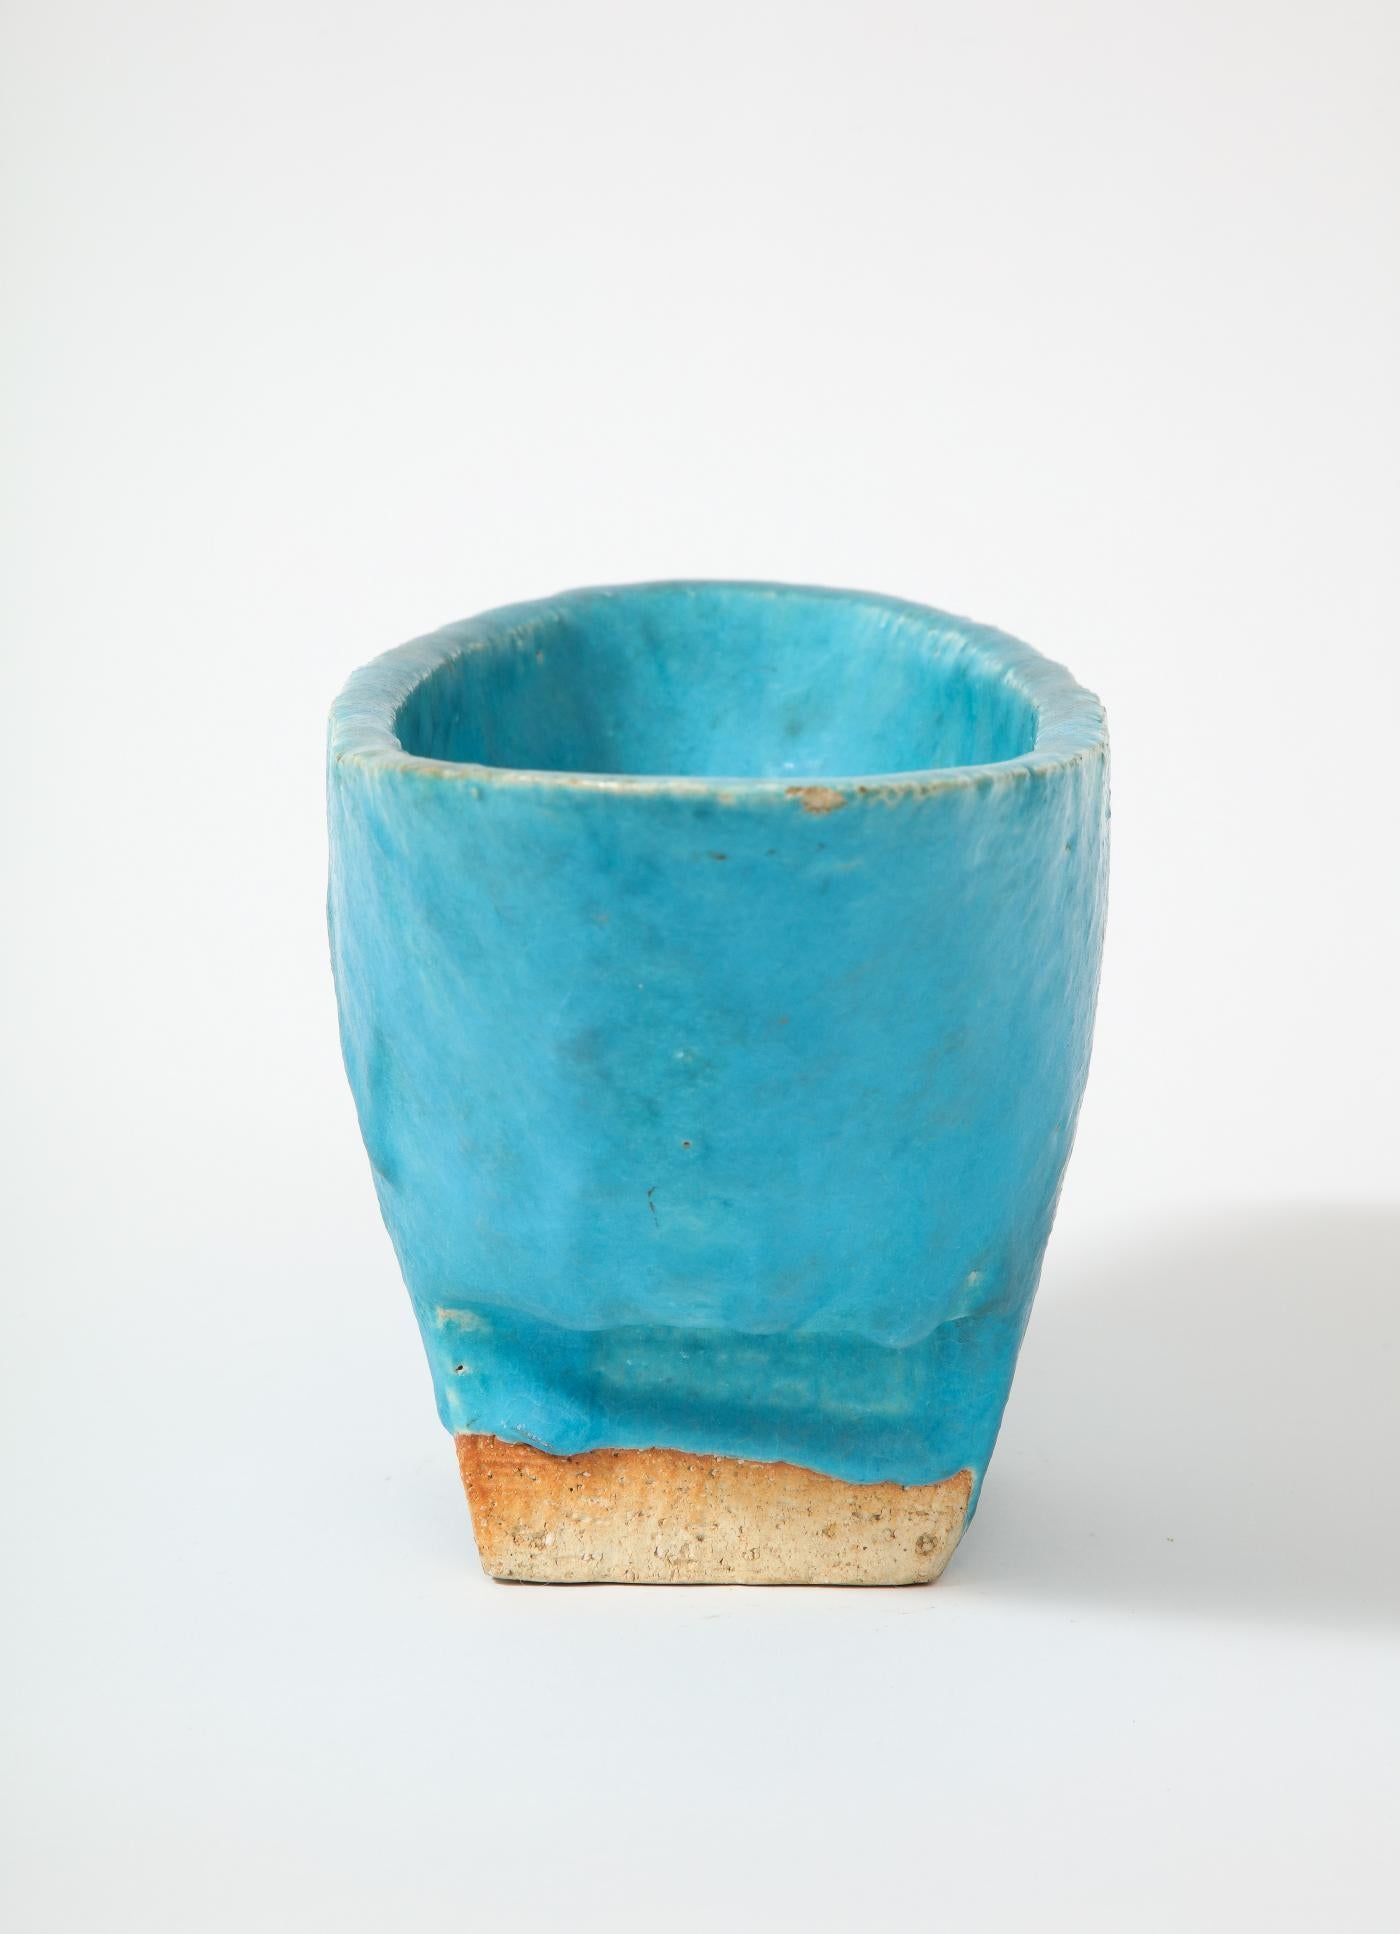 Glazed Ceramic Footed Vessel, Japan, 20th C.

Striking blue bowl/vessel with a unique shape. The thick glaze sits beautifully on substantial, hand formed stoneware.